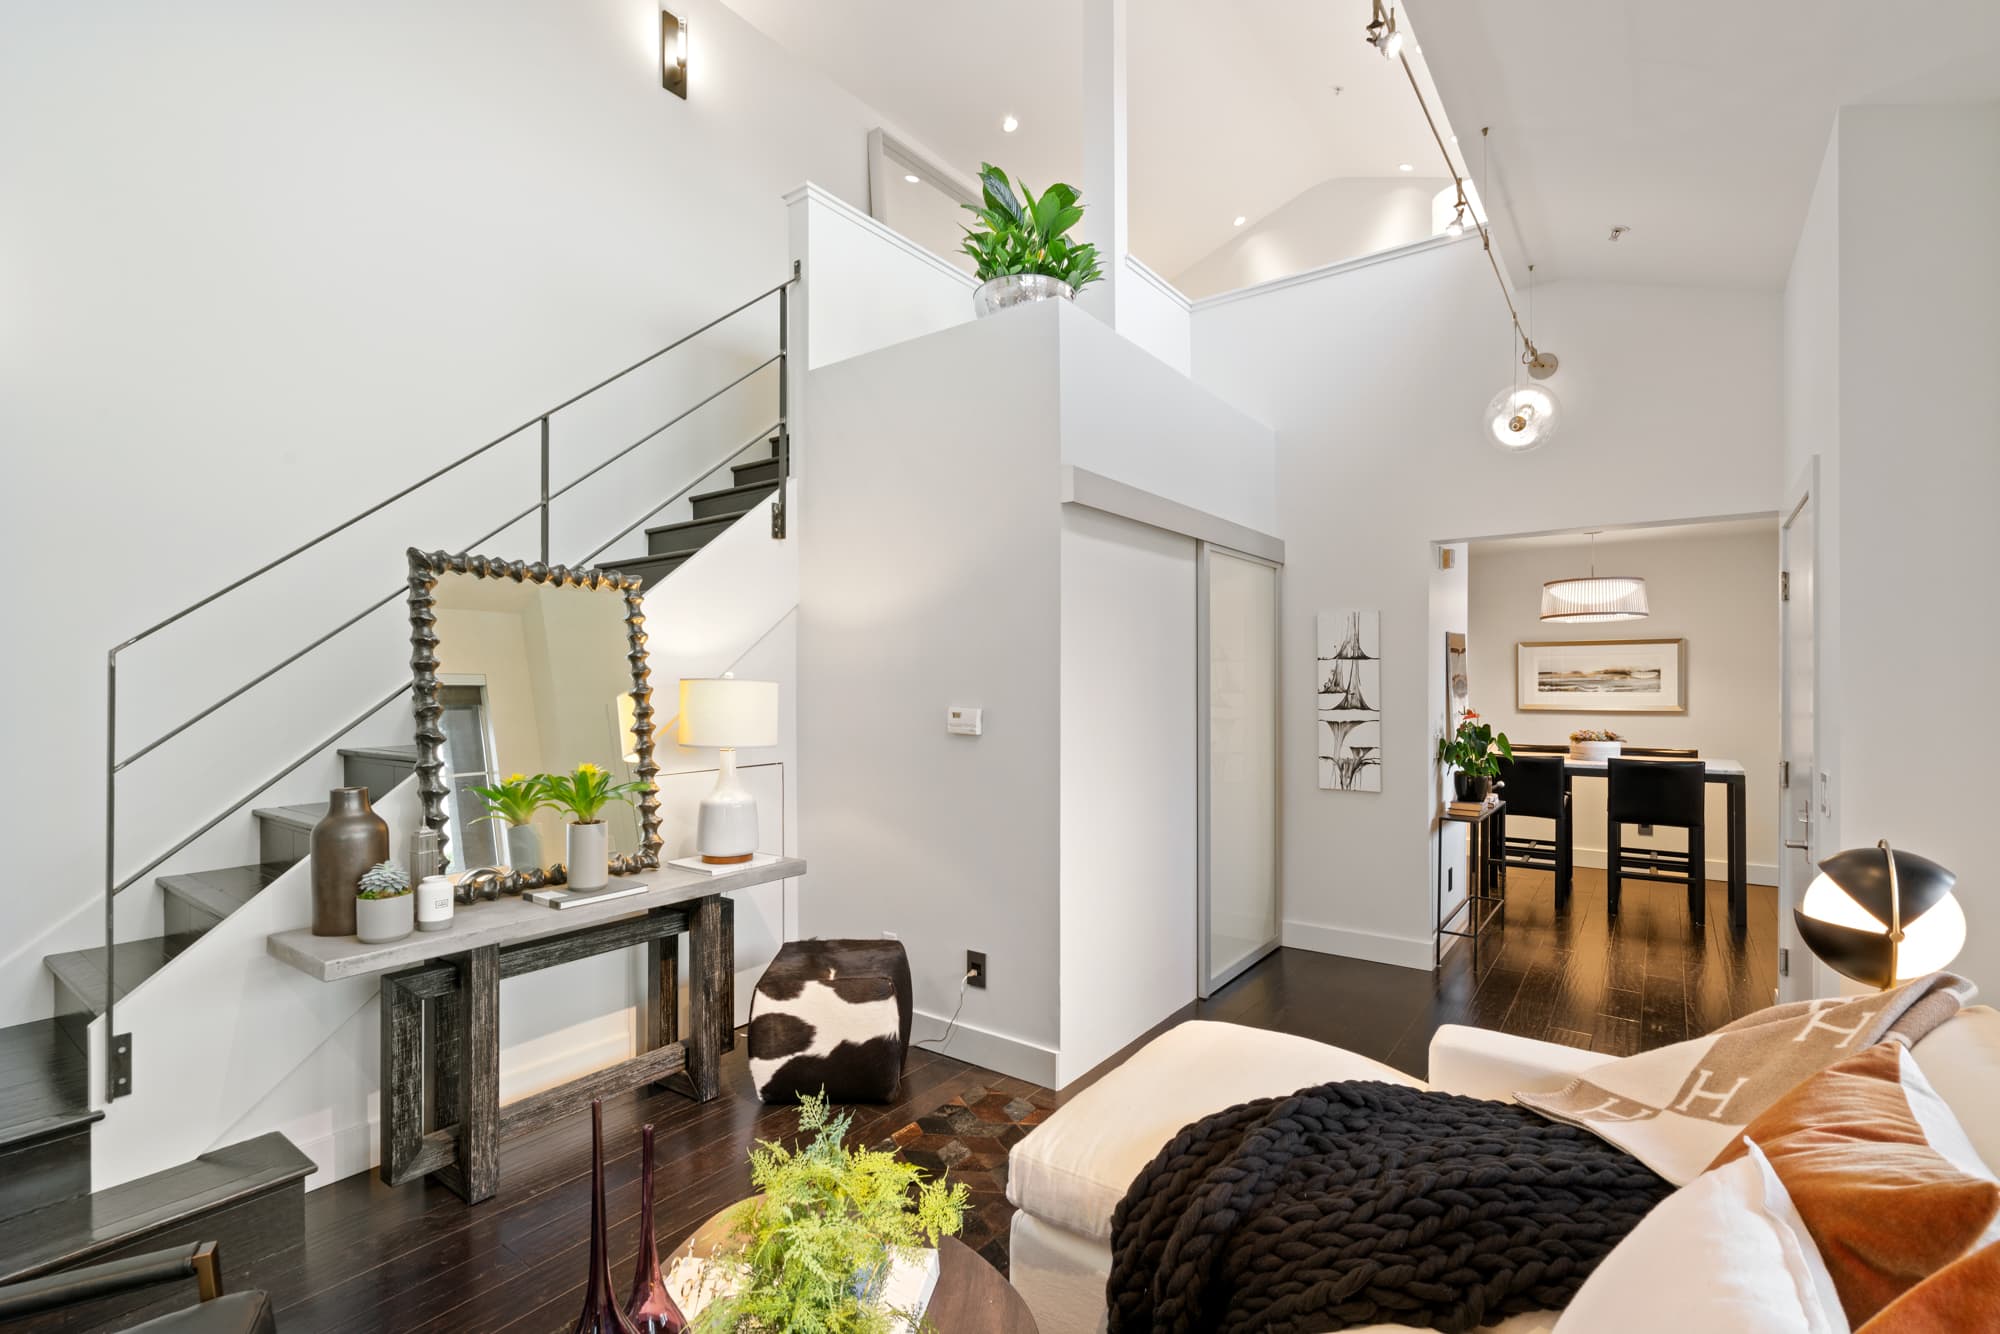 342 Hayes, #11K. A dramatic penthouse loft with a bright disposition, bespoke finishes with a central yet quiet location with parking and laundry in the heart of Hayes Valley. Listed with Kevin Ho and Jonathan McNarry, Vanguard Properties, San Francisco.